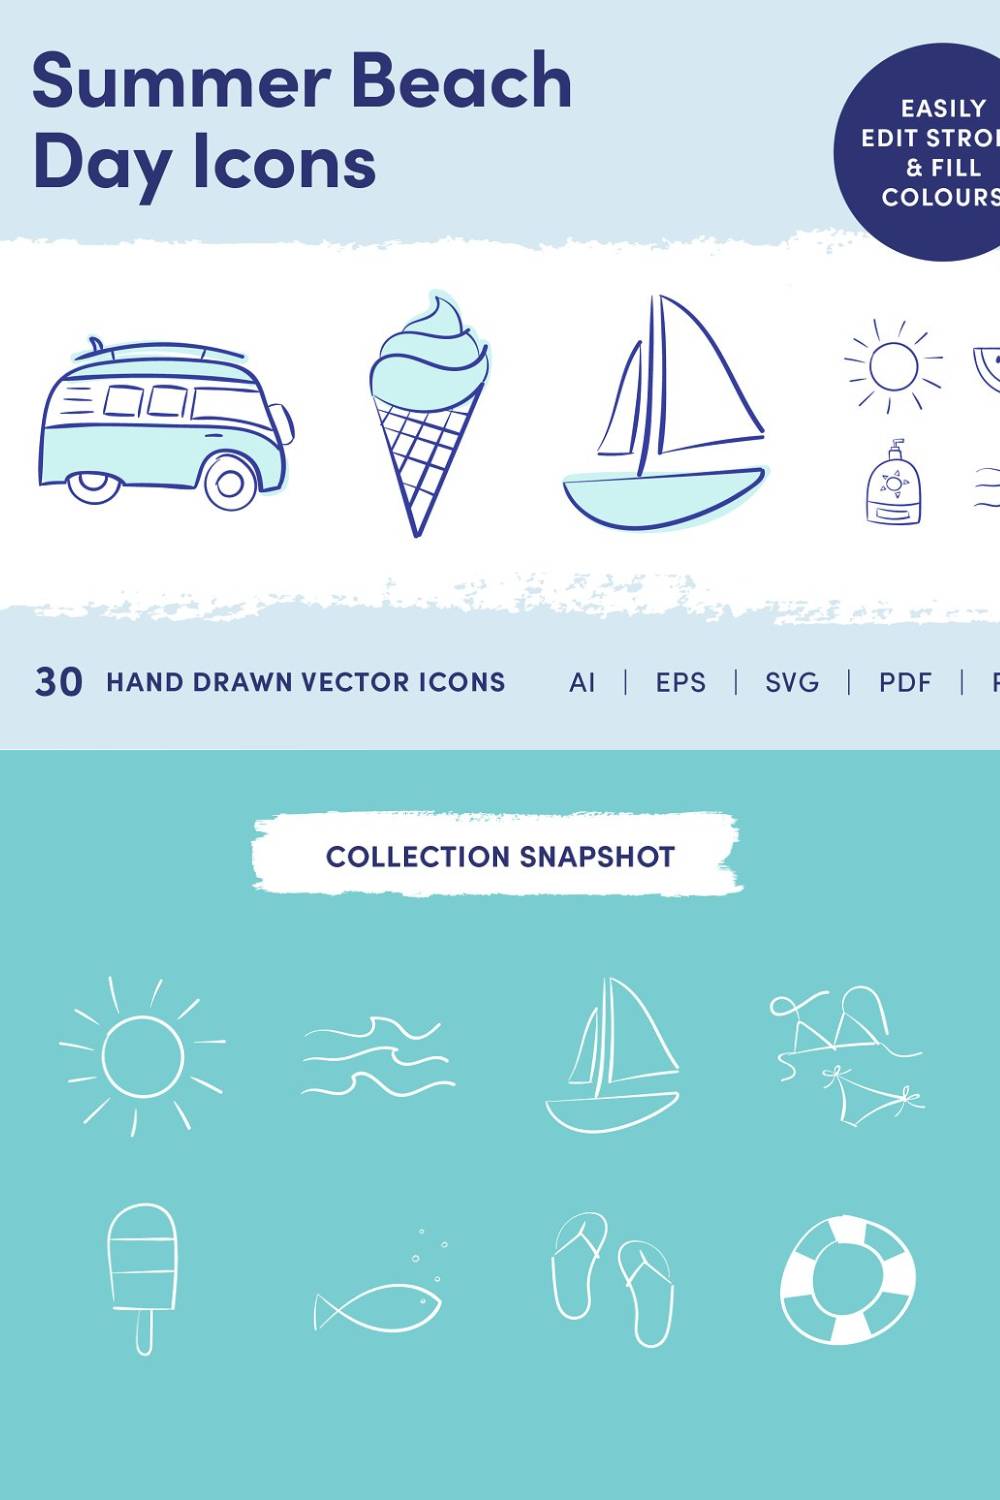 Summer Beach Day Icons Pinterest Cover.